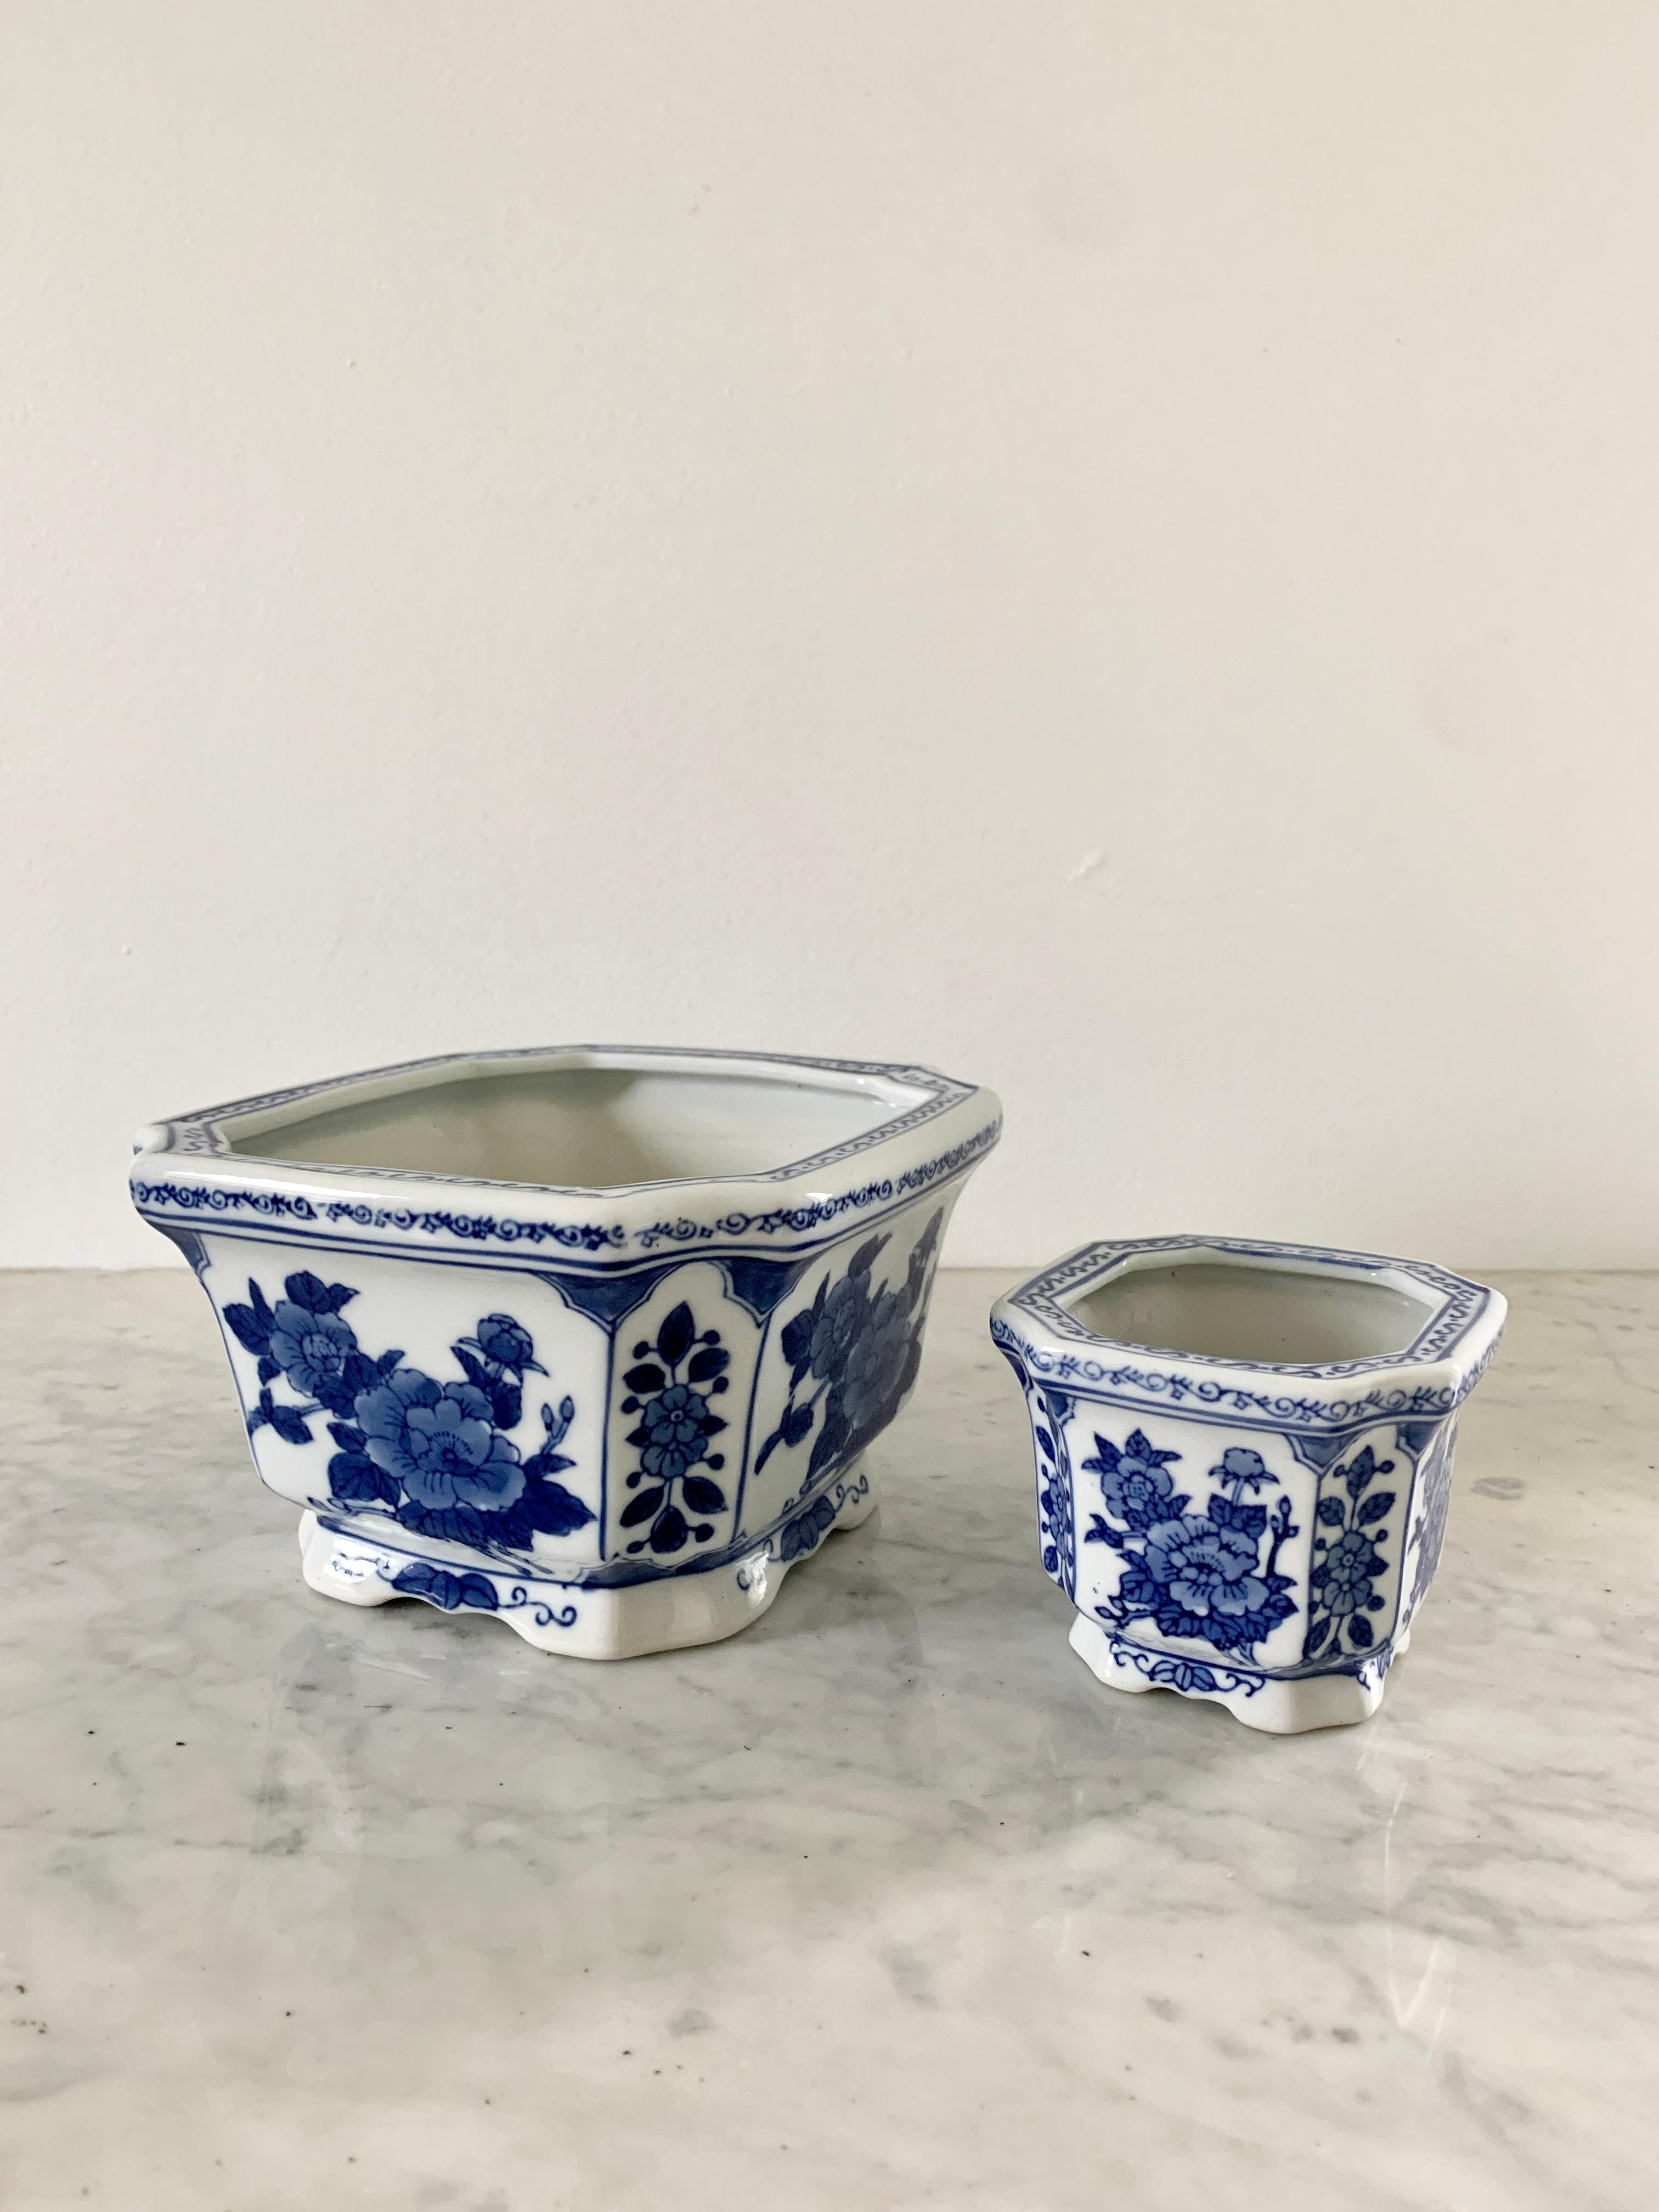 A gorgeous Chinoiserie blue and white porcelain cachepot planter

Circa late 20th century

Large Measures: 7